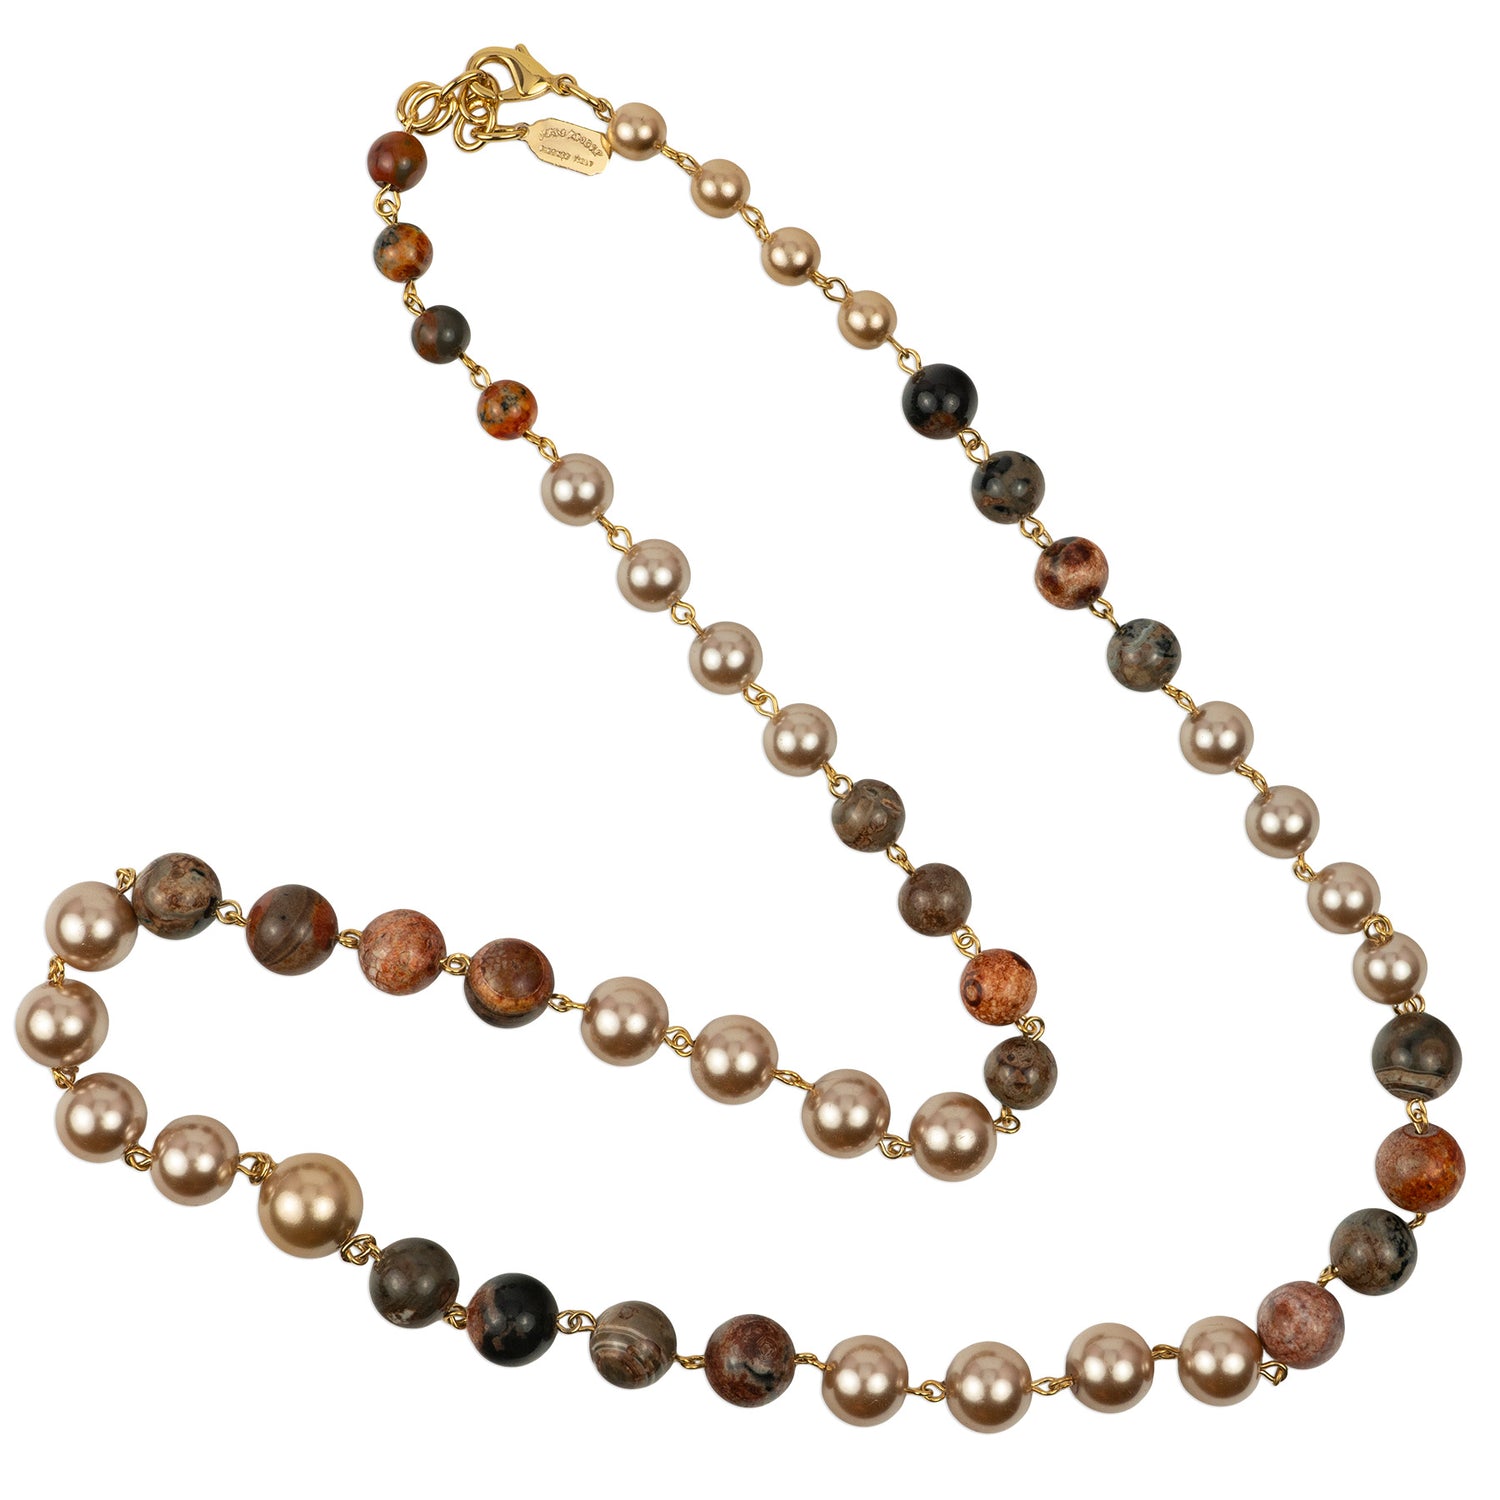 Long necklace of semiprecious stones and pearls